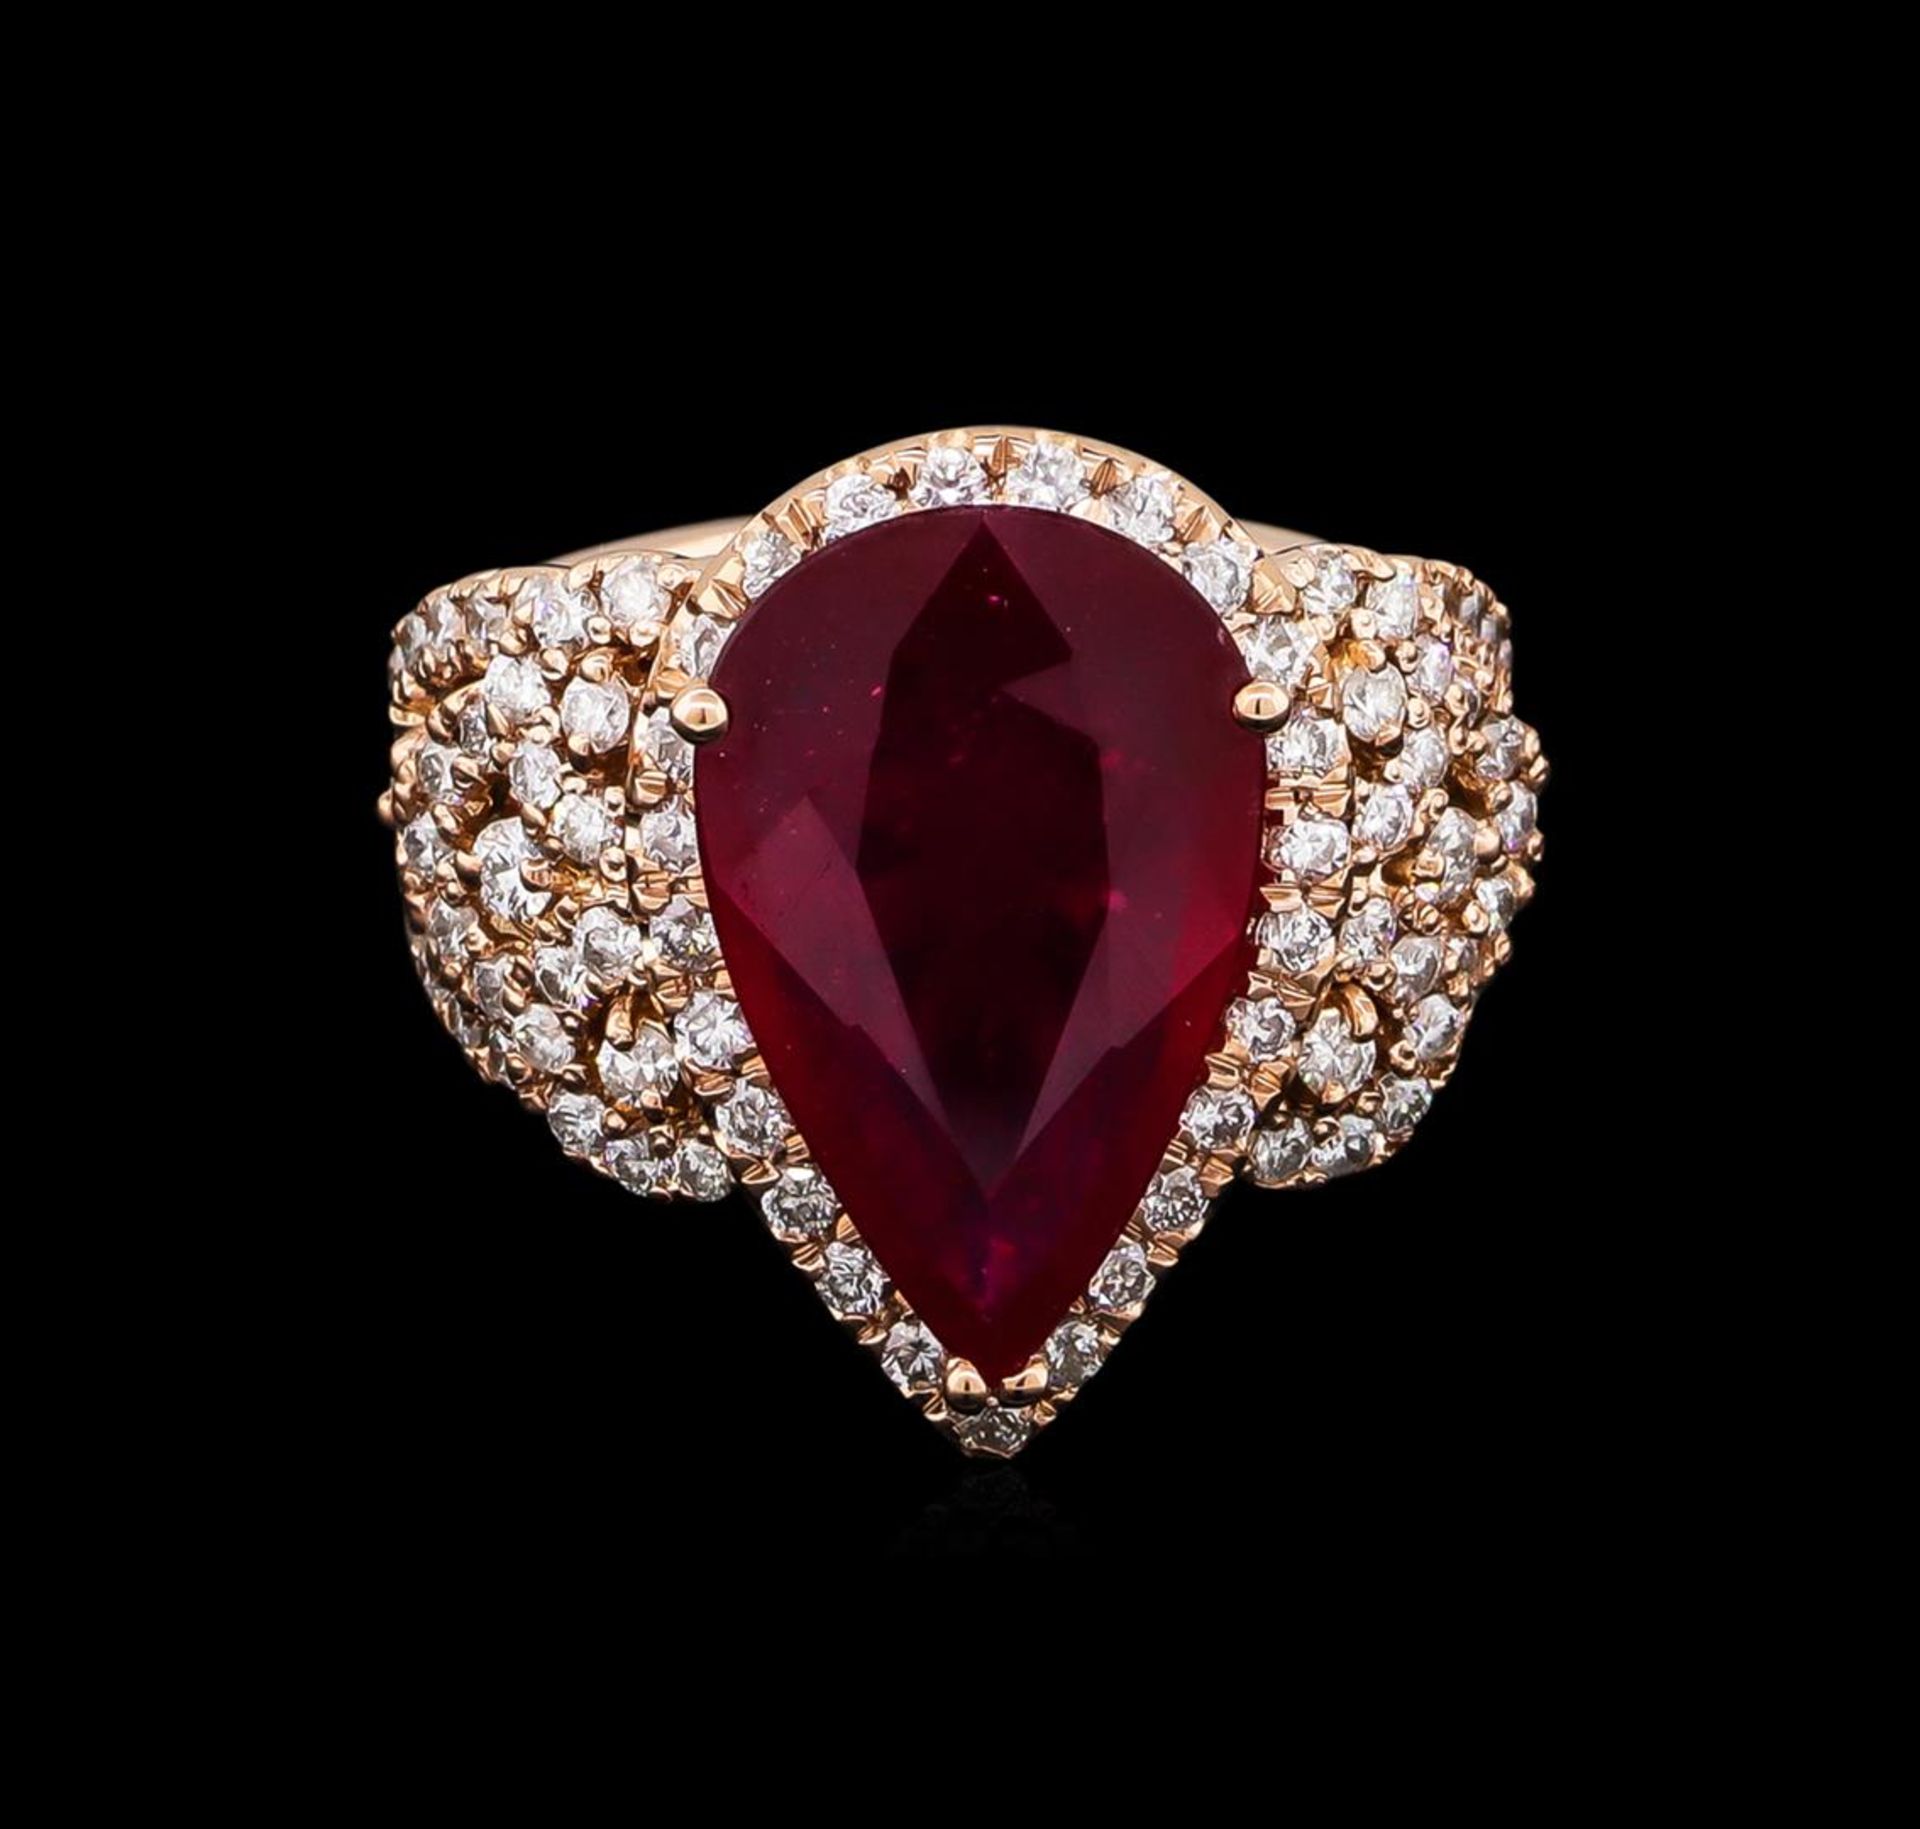 5.35ct Ruby and Diamond Ring - 14KT Rose Gold - Image 2 of 6